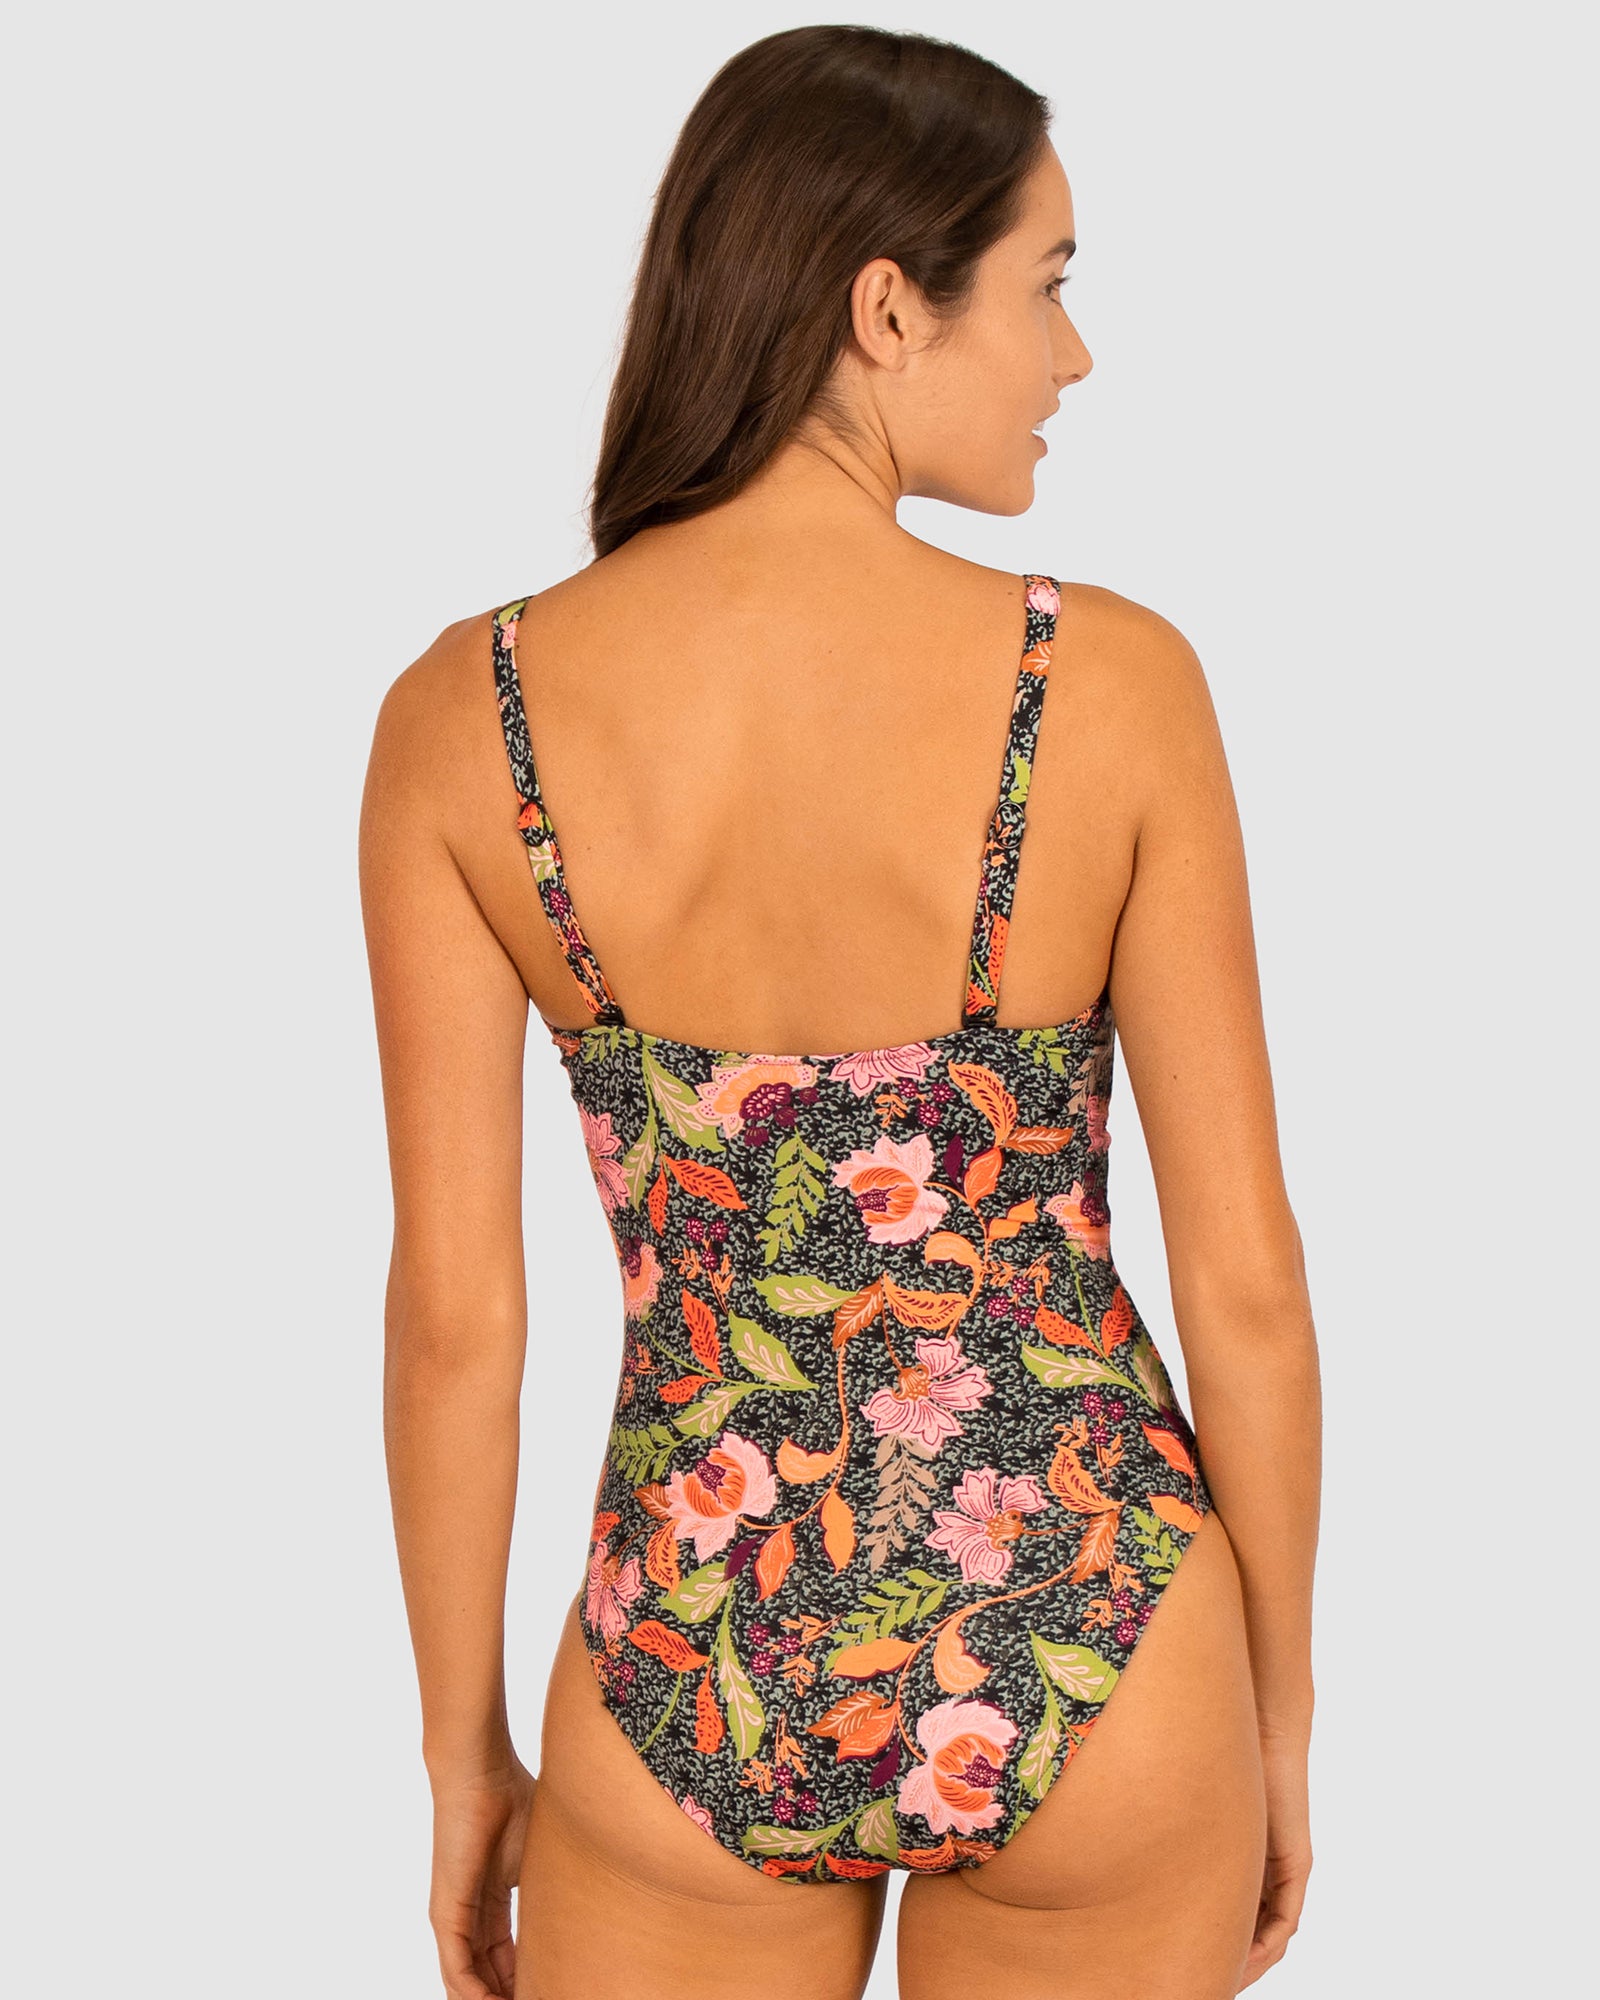 NOMAD SUMMER D-E UNDERWIRE ONE PIECE SWIMSUIT